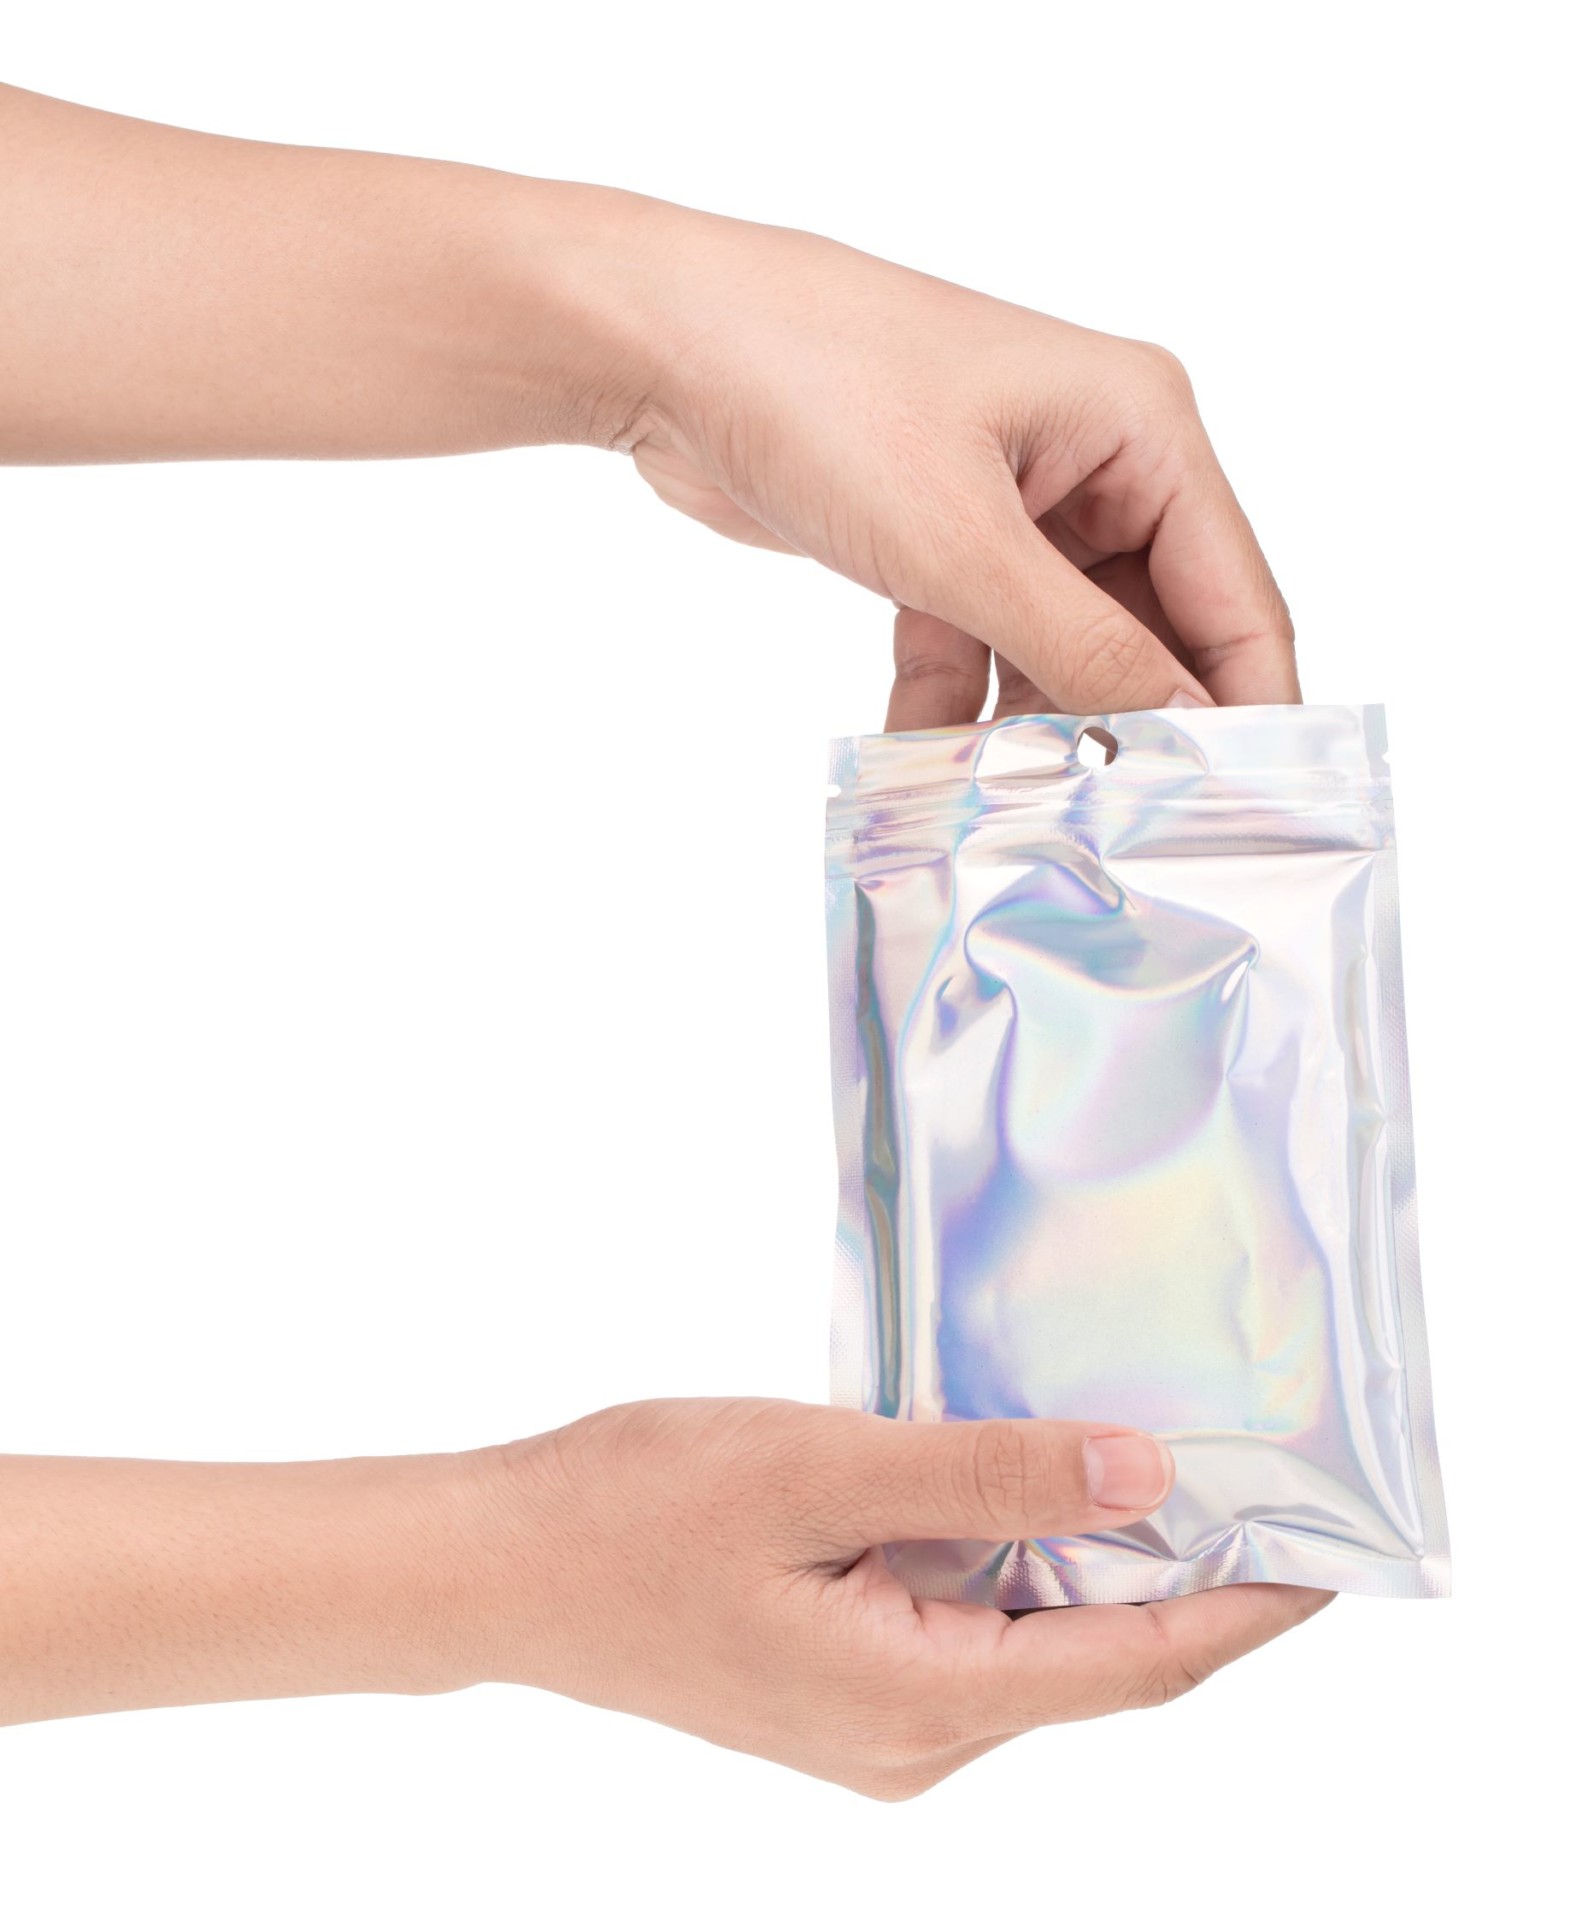 Are Mylar Bags Eco Friendly? 12 Important Facts You Should Know